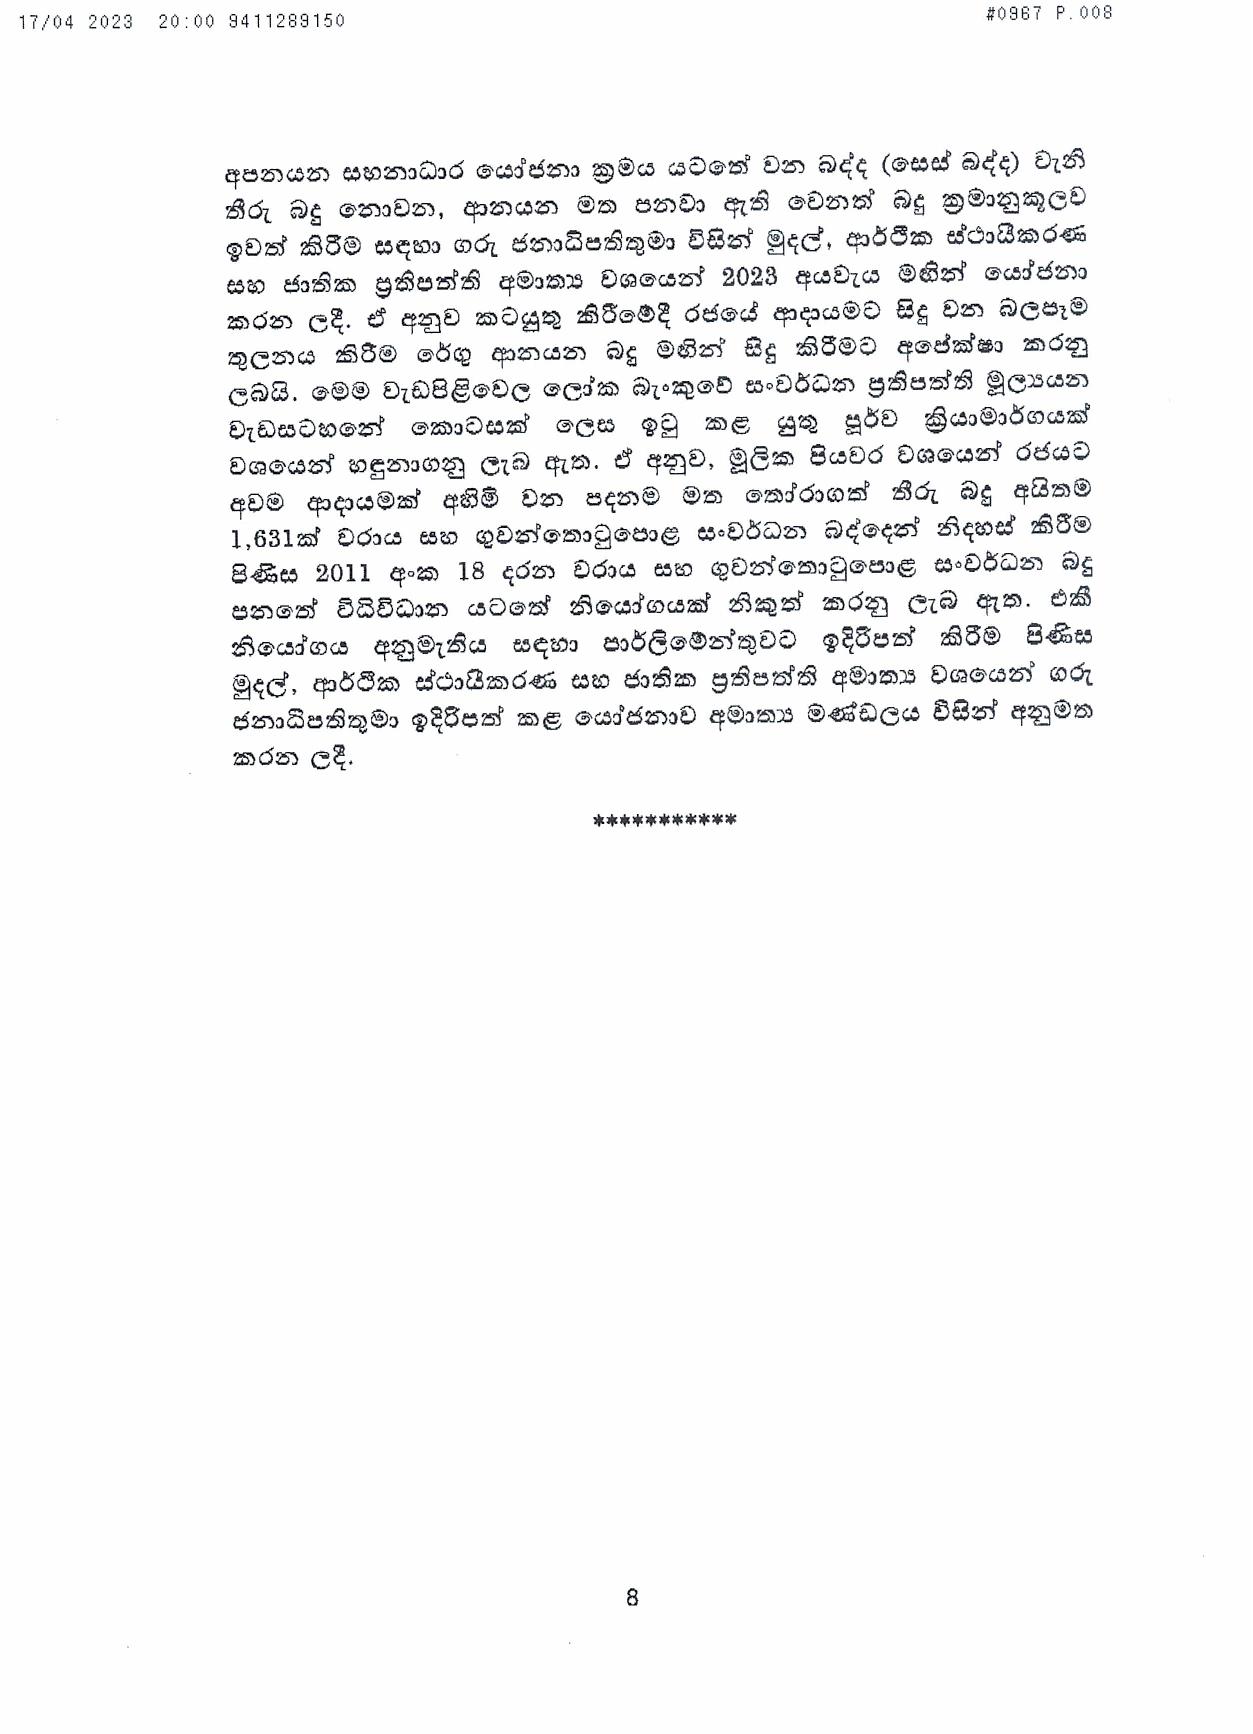 Cabinet Decisions on 17.04.2023 page 008